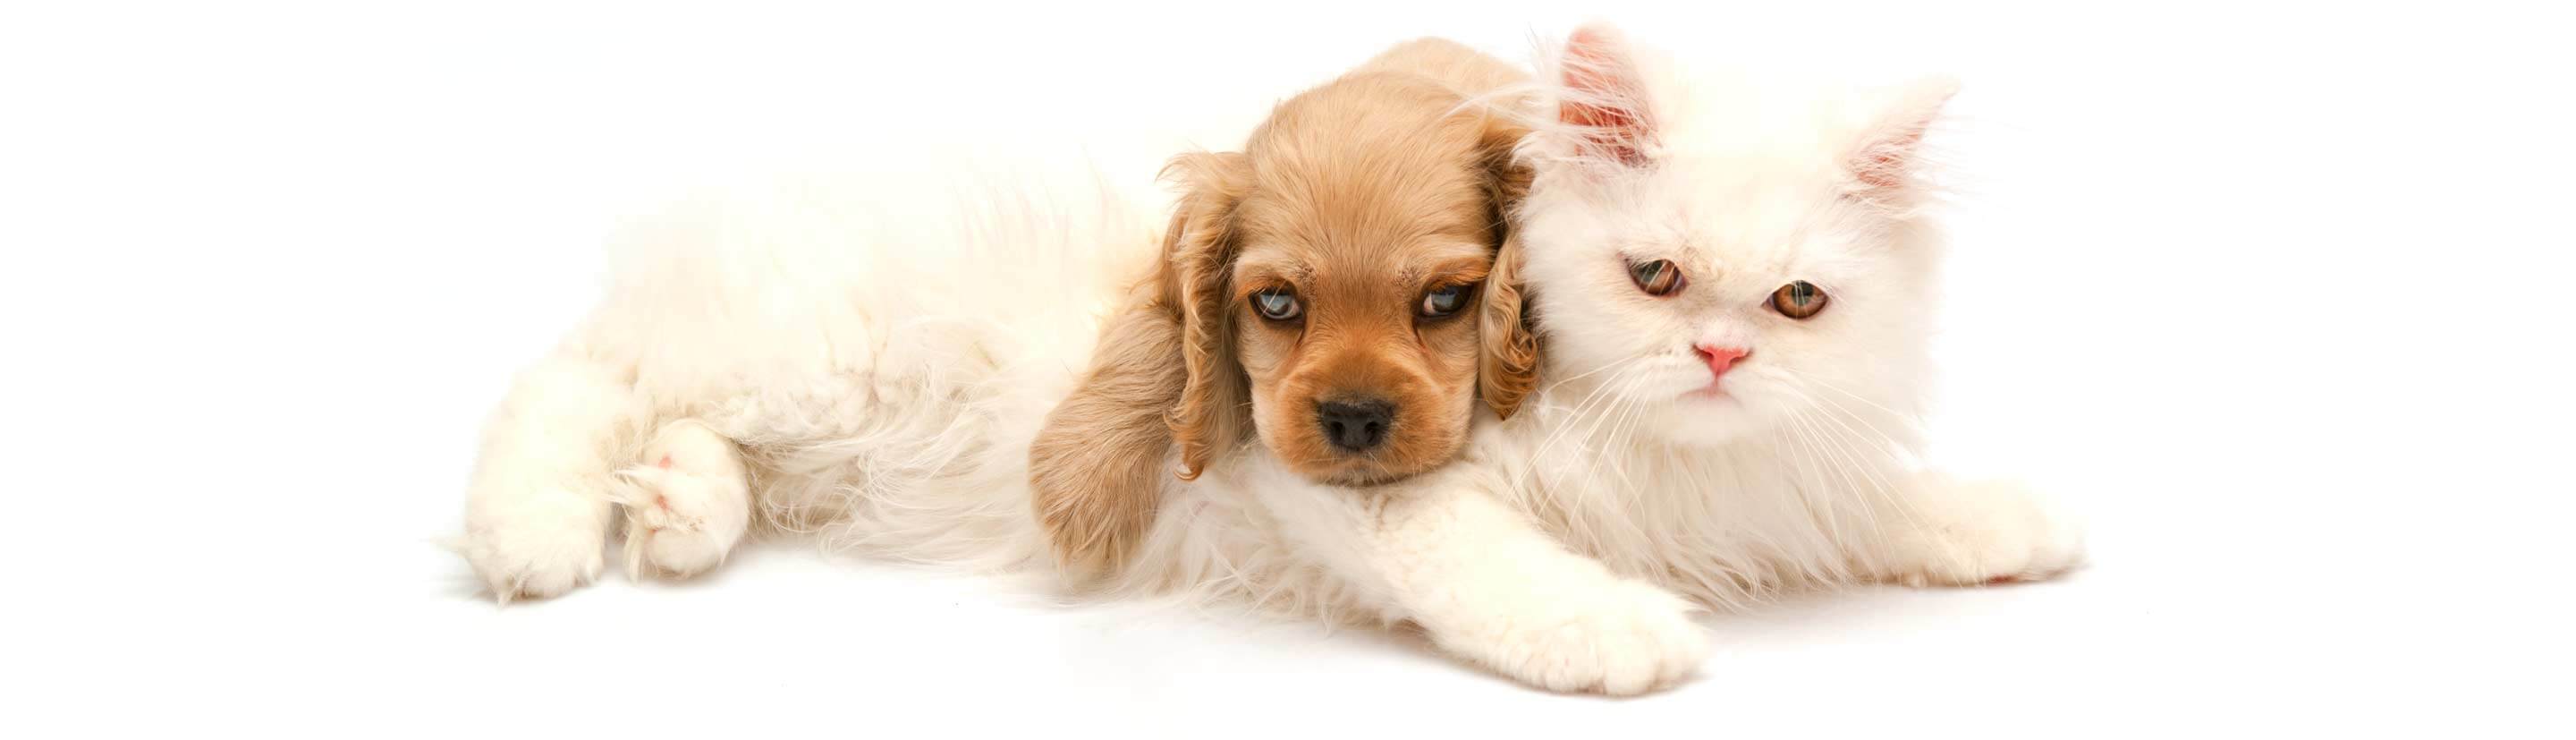 Brown Dog and White Cat